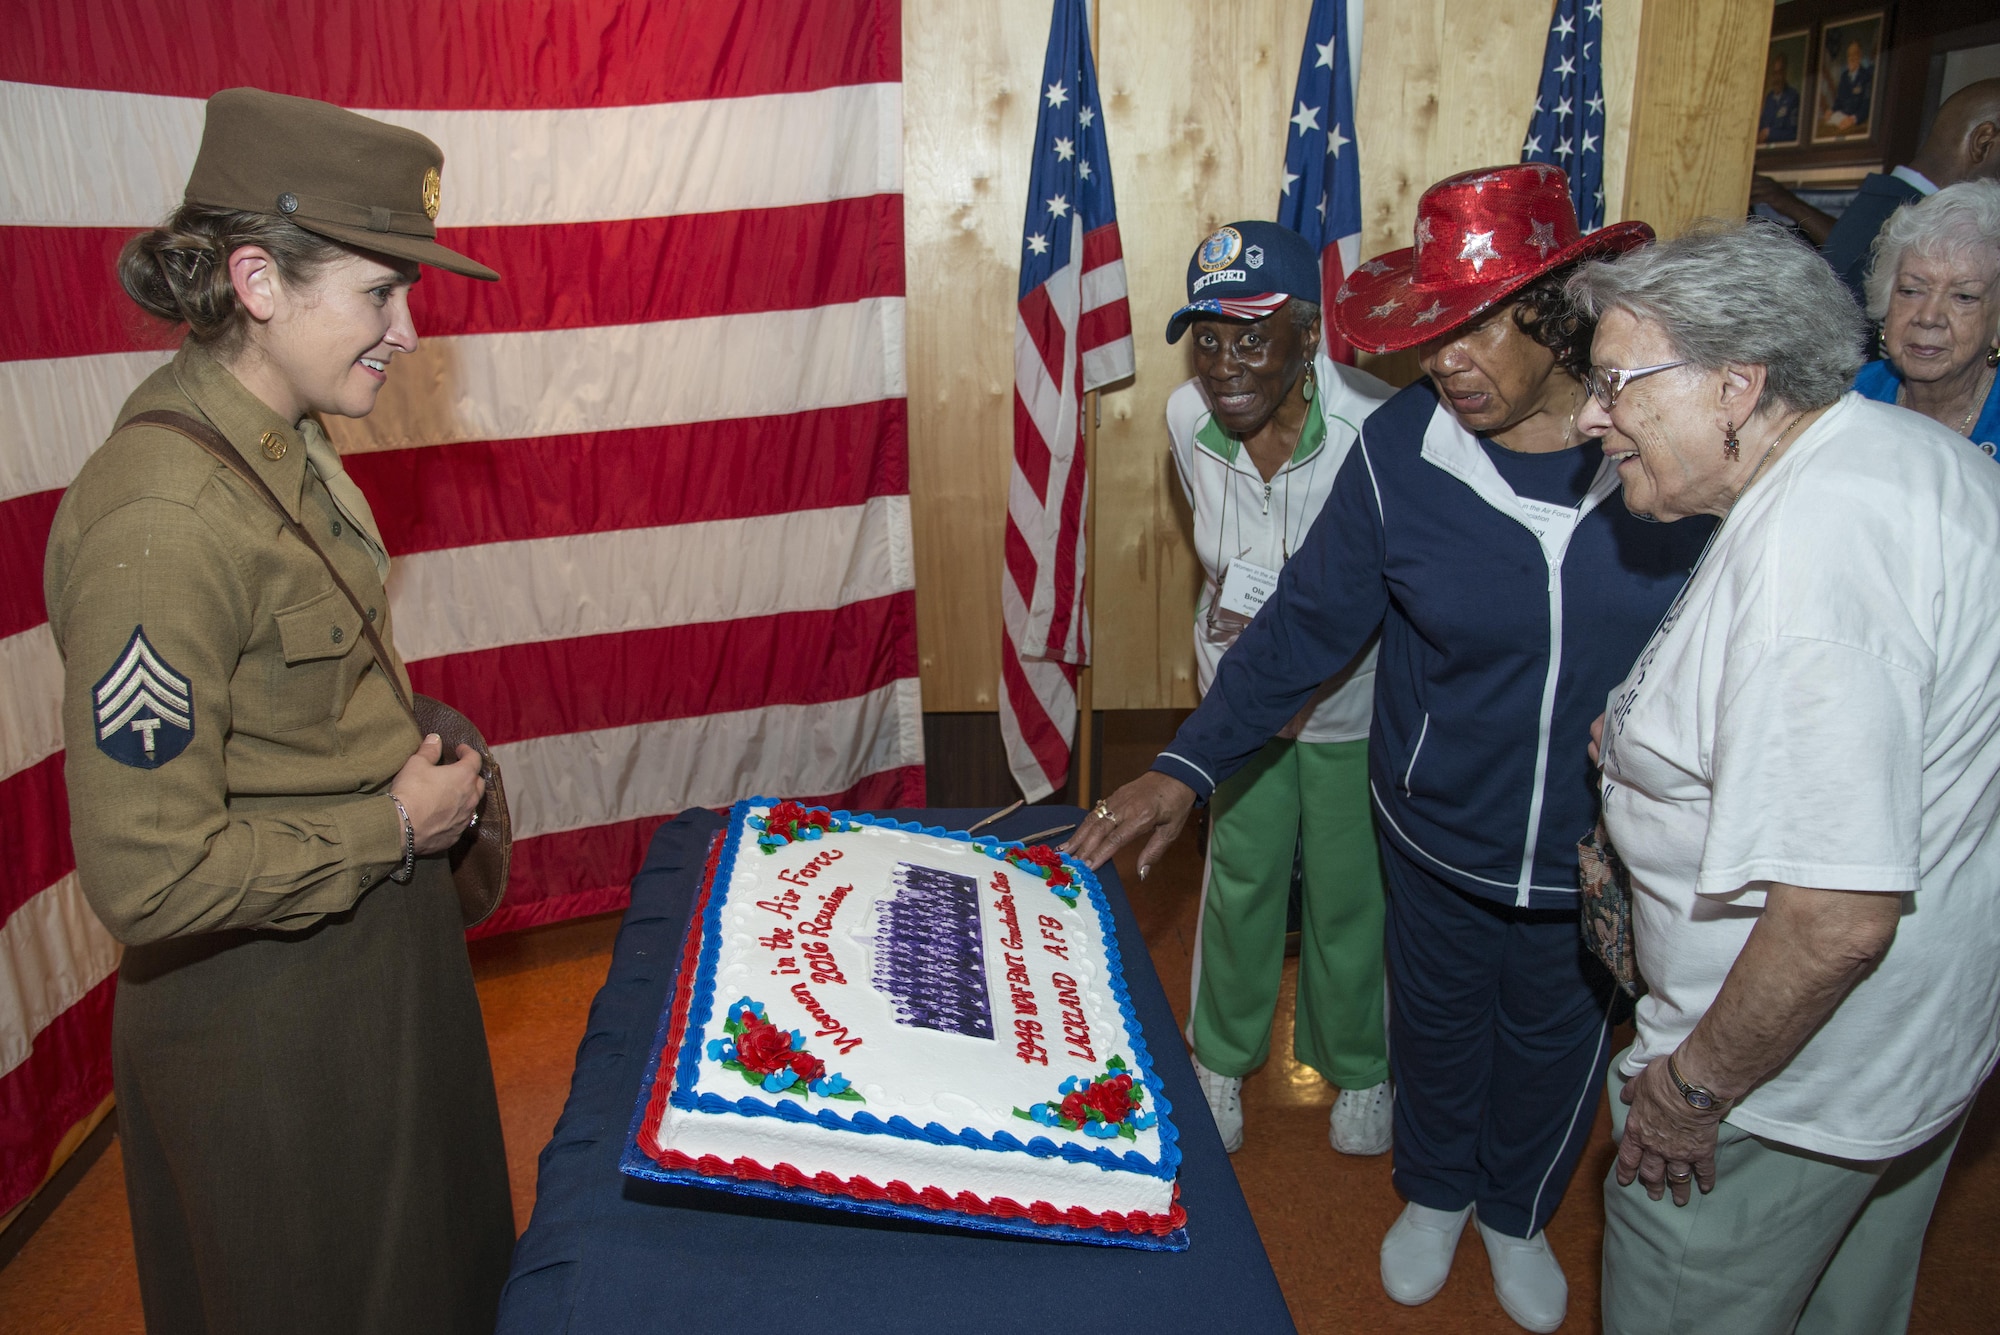 Members of the Women in the Air Force, the term for women who joined the Air Force between the years of 1949 -1976, view a celebratory cake with a photo of the first all-female Air Force basic Military Training Class during the Joint Base San Antonio WAF Reunion Oct. 7 at JBSA-Lackland. WAF was founded in 1948 out of the Women’s Armed Service Integration Act, which enabled tens of thousands of female service members to find jobs in the Air Force. In 1976 women were accepted into the service on an equal basis with men. 